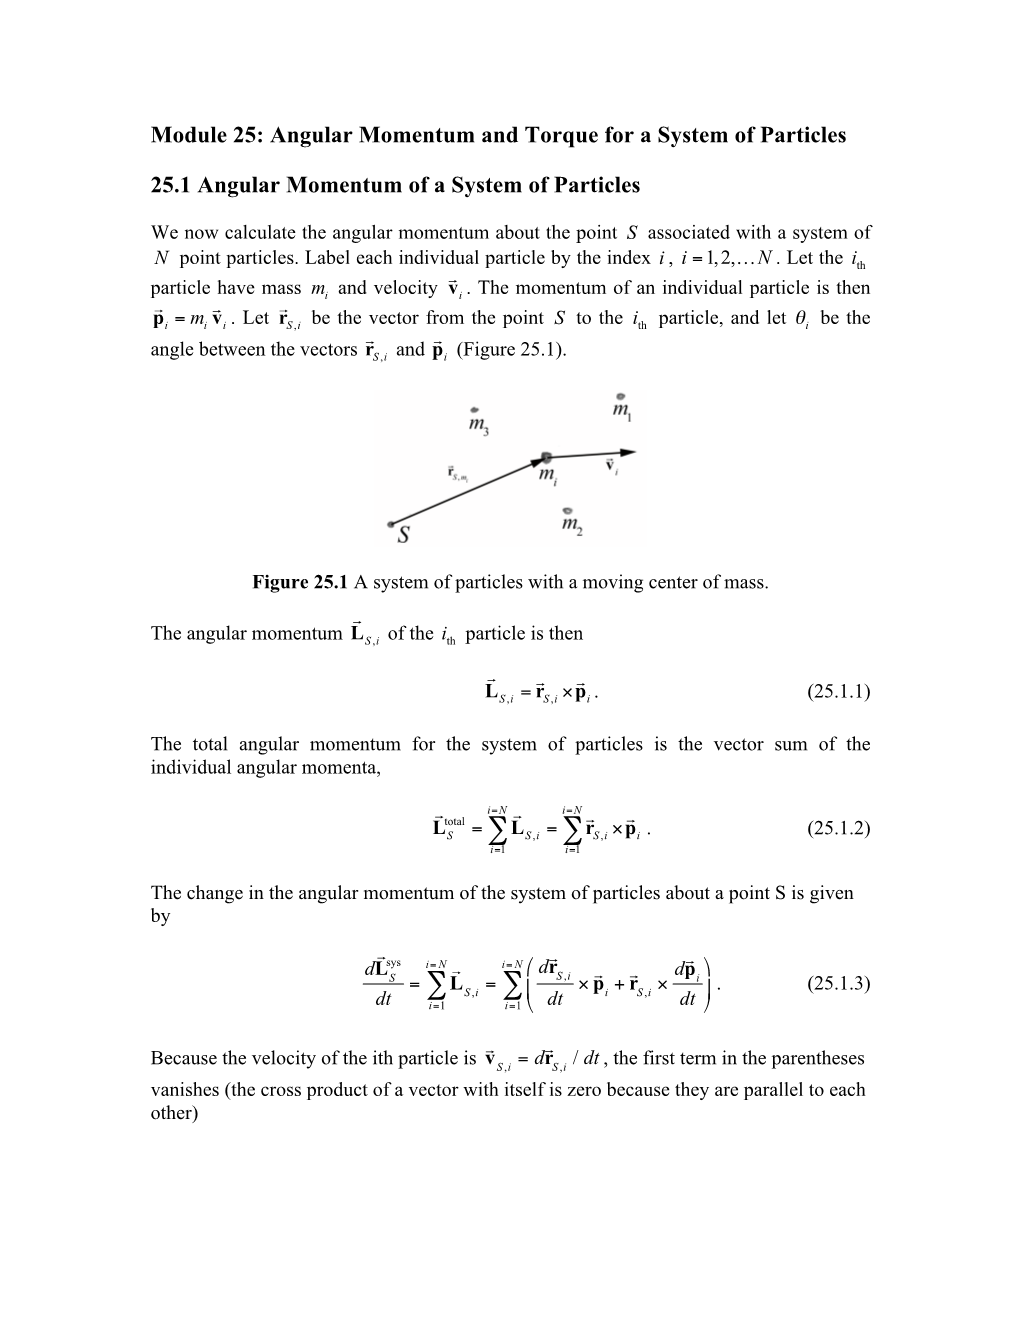 Angular Momentum and Torque for a System of Particles